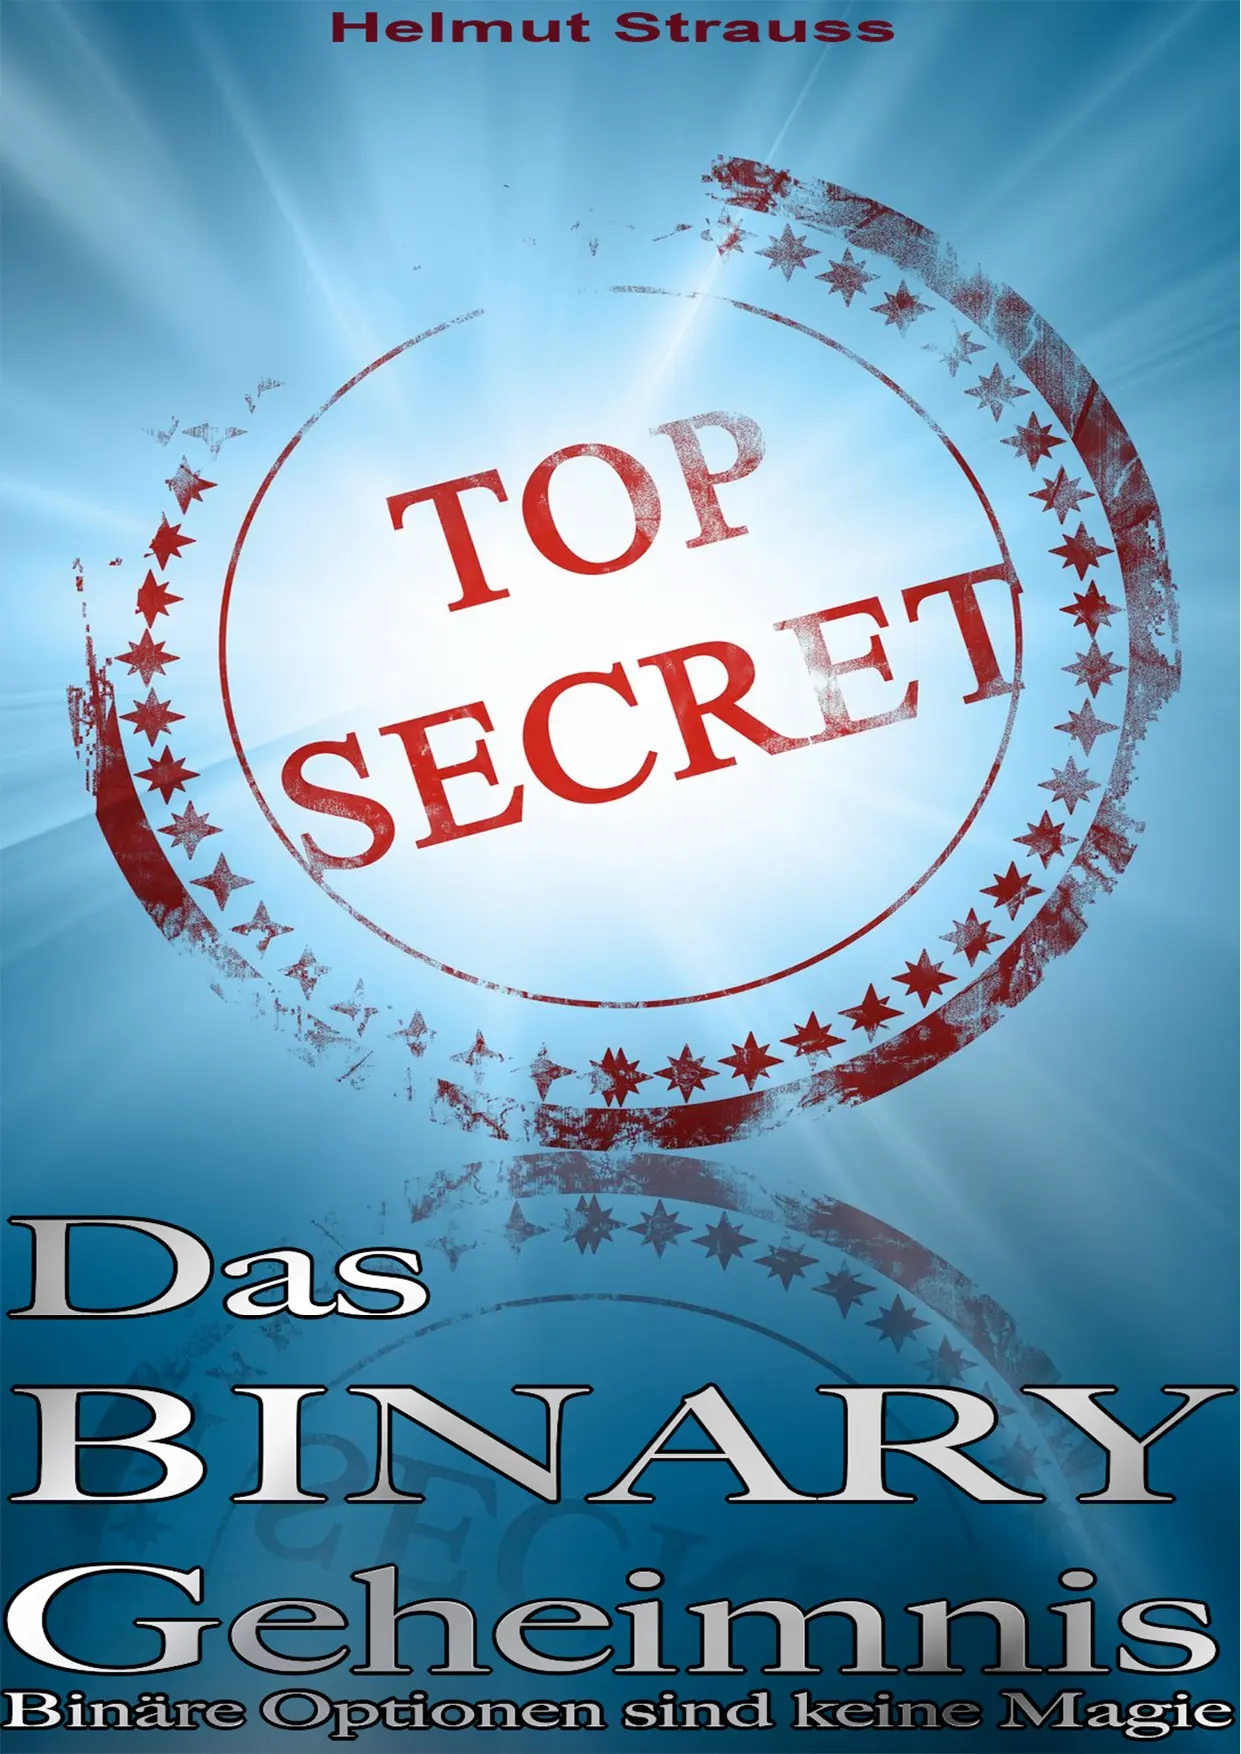 The Binary Secret Binary options are no magic Table of contents I Preface - фото 1